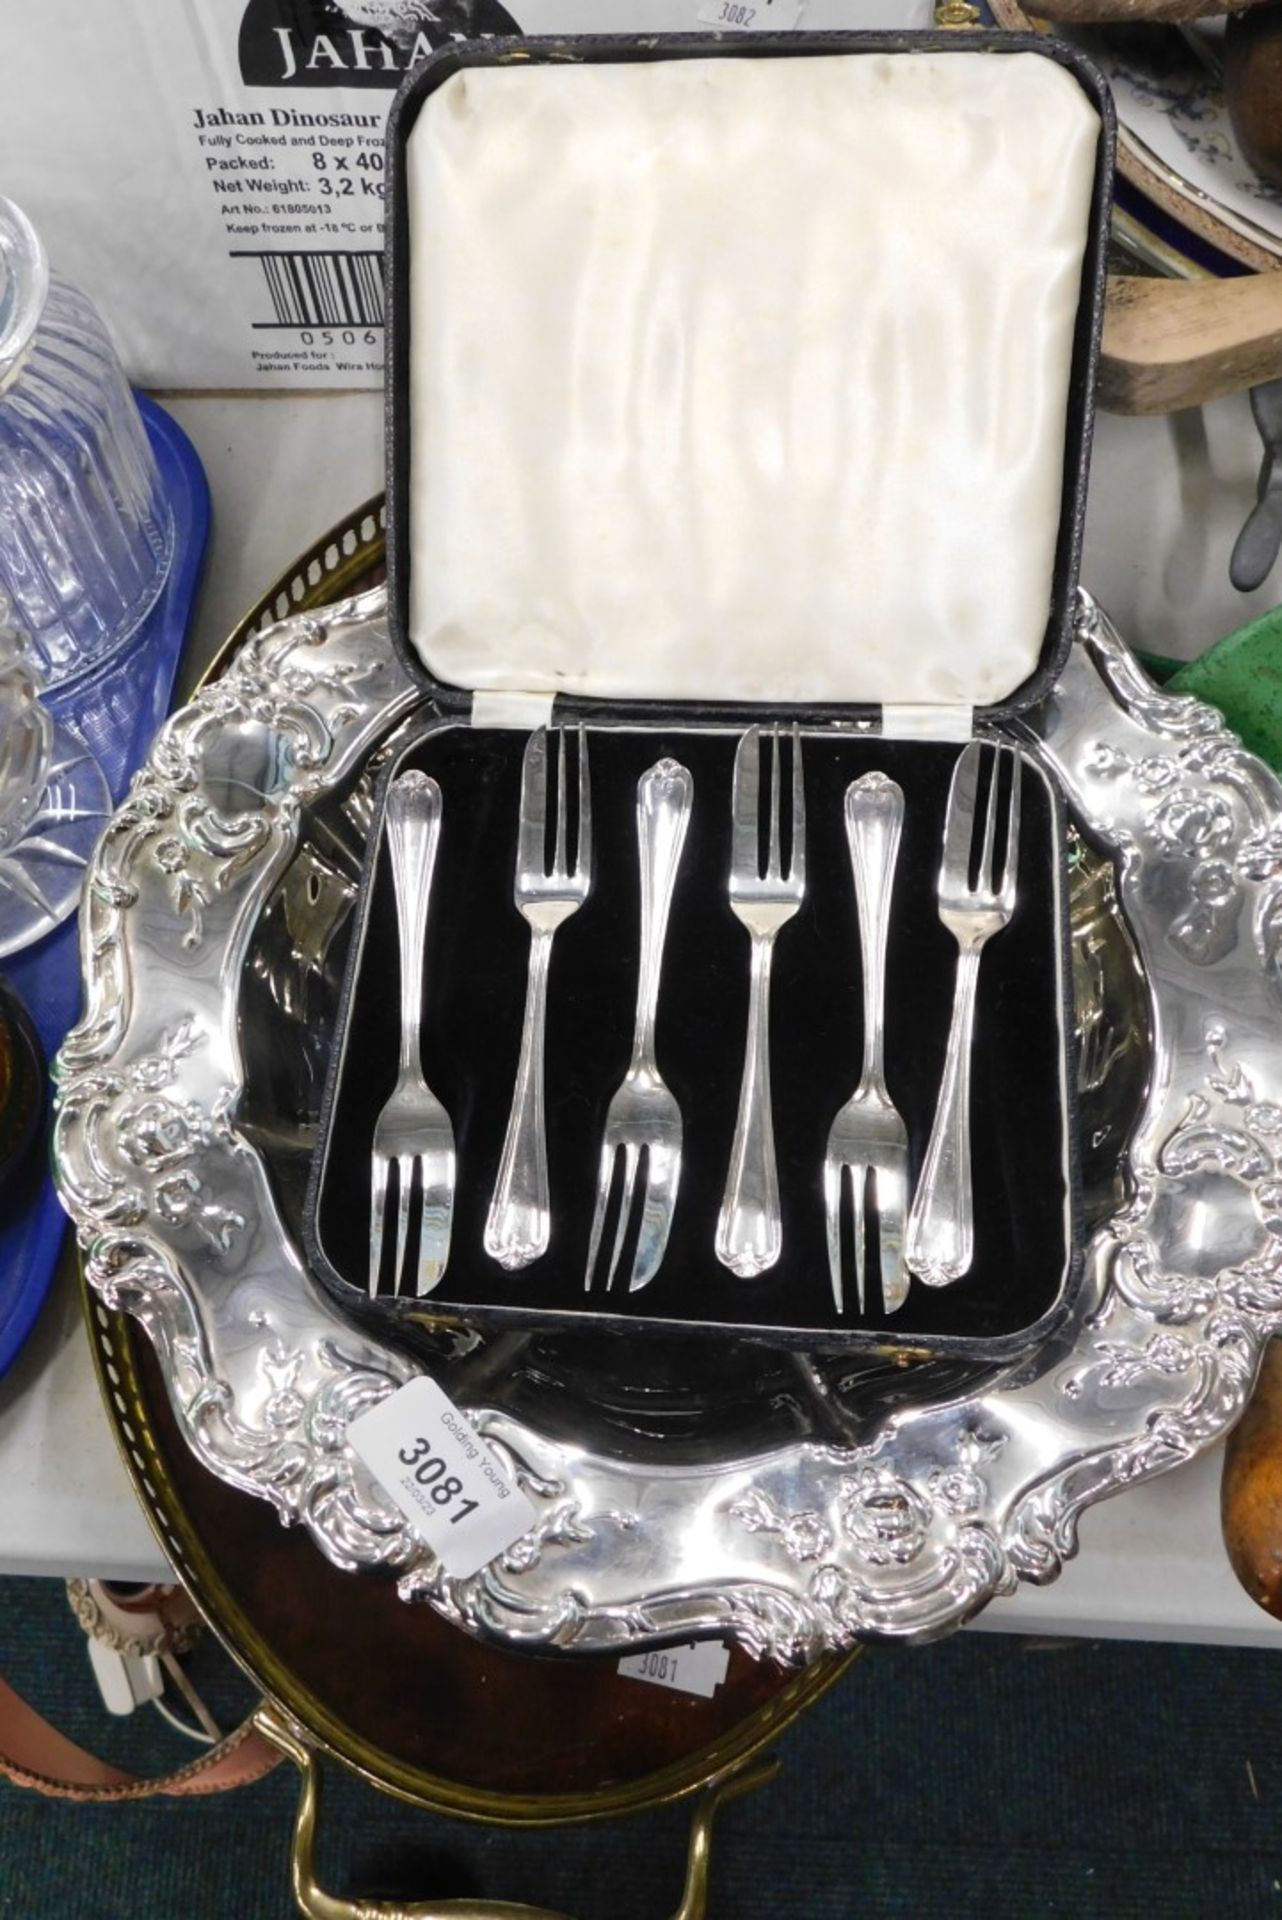 A galleried edged tray, silver plated dish and a cased set of entree forks.